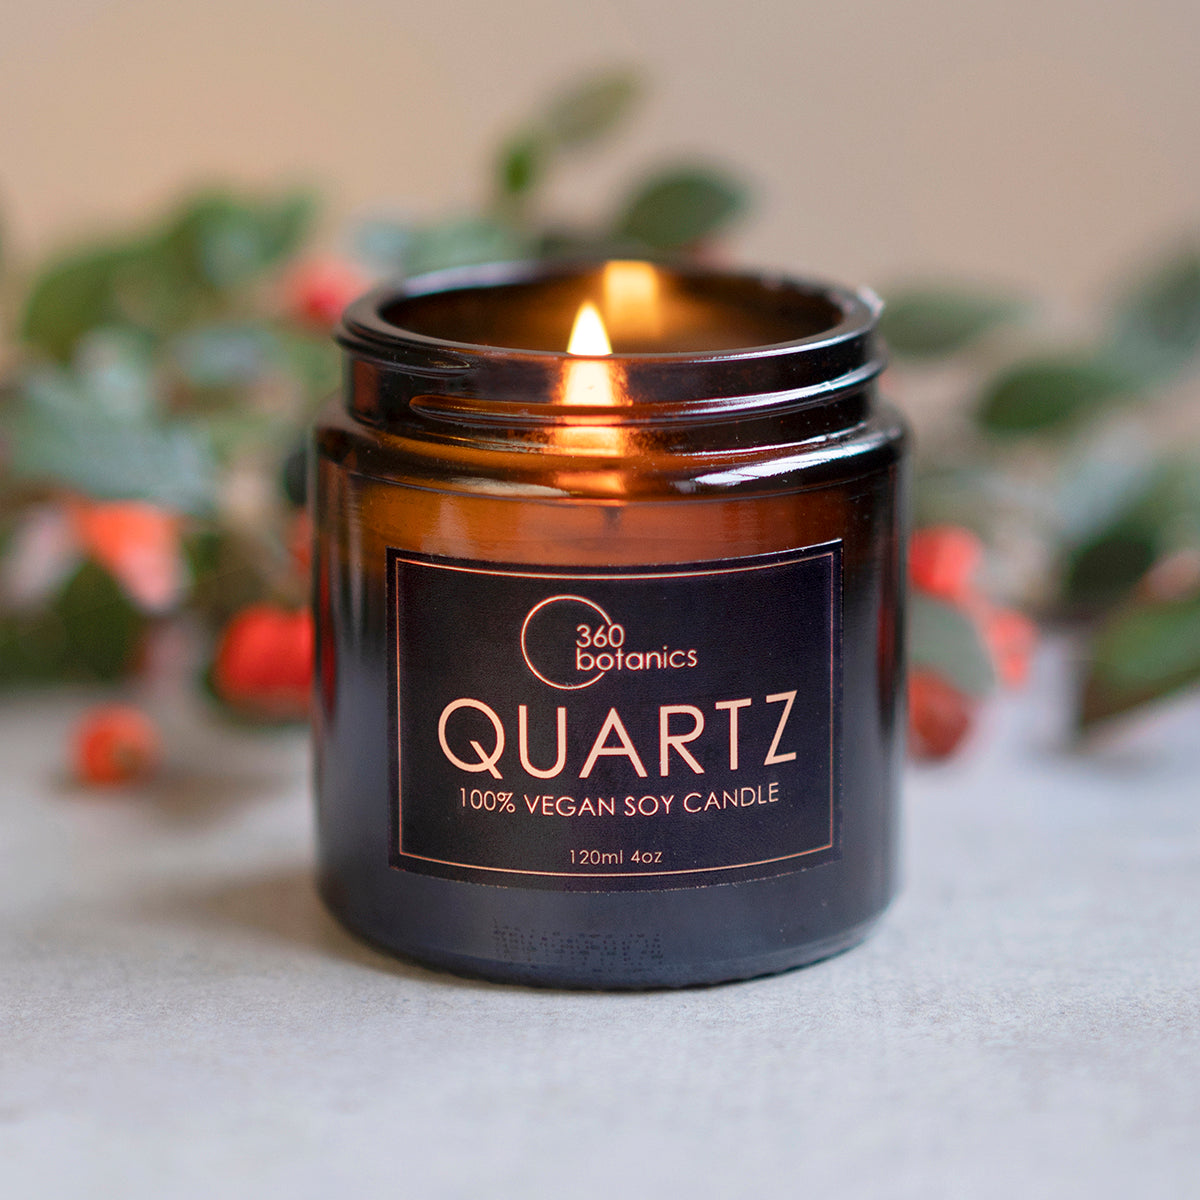 Image of Quartz Vegan soy candle photographed with Christmas berries